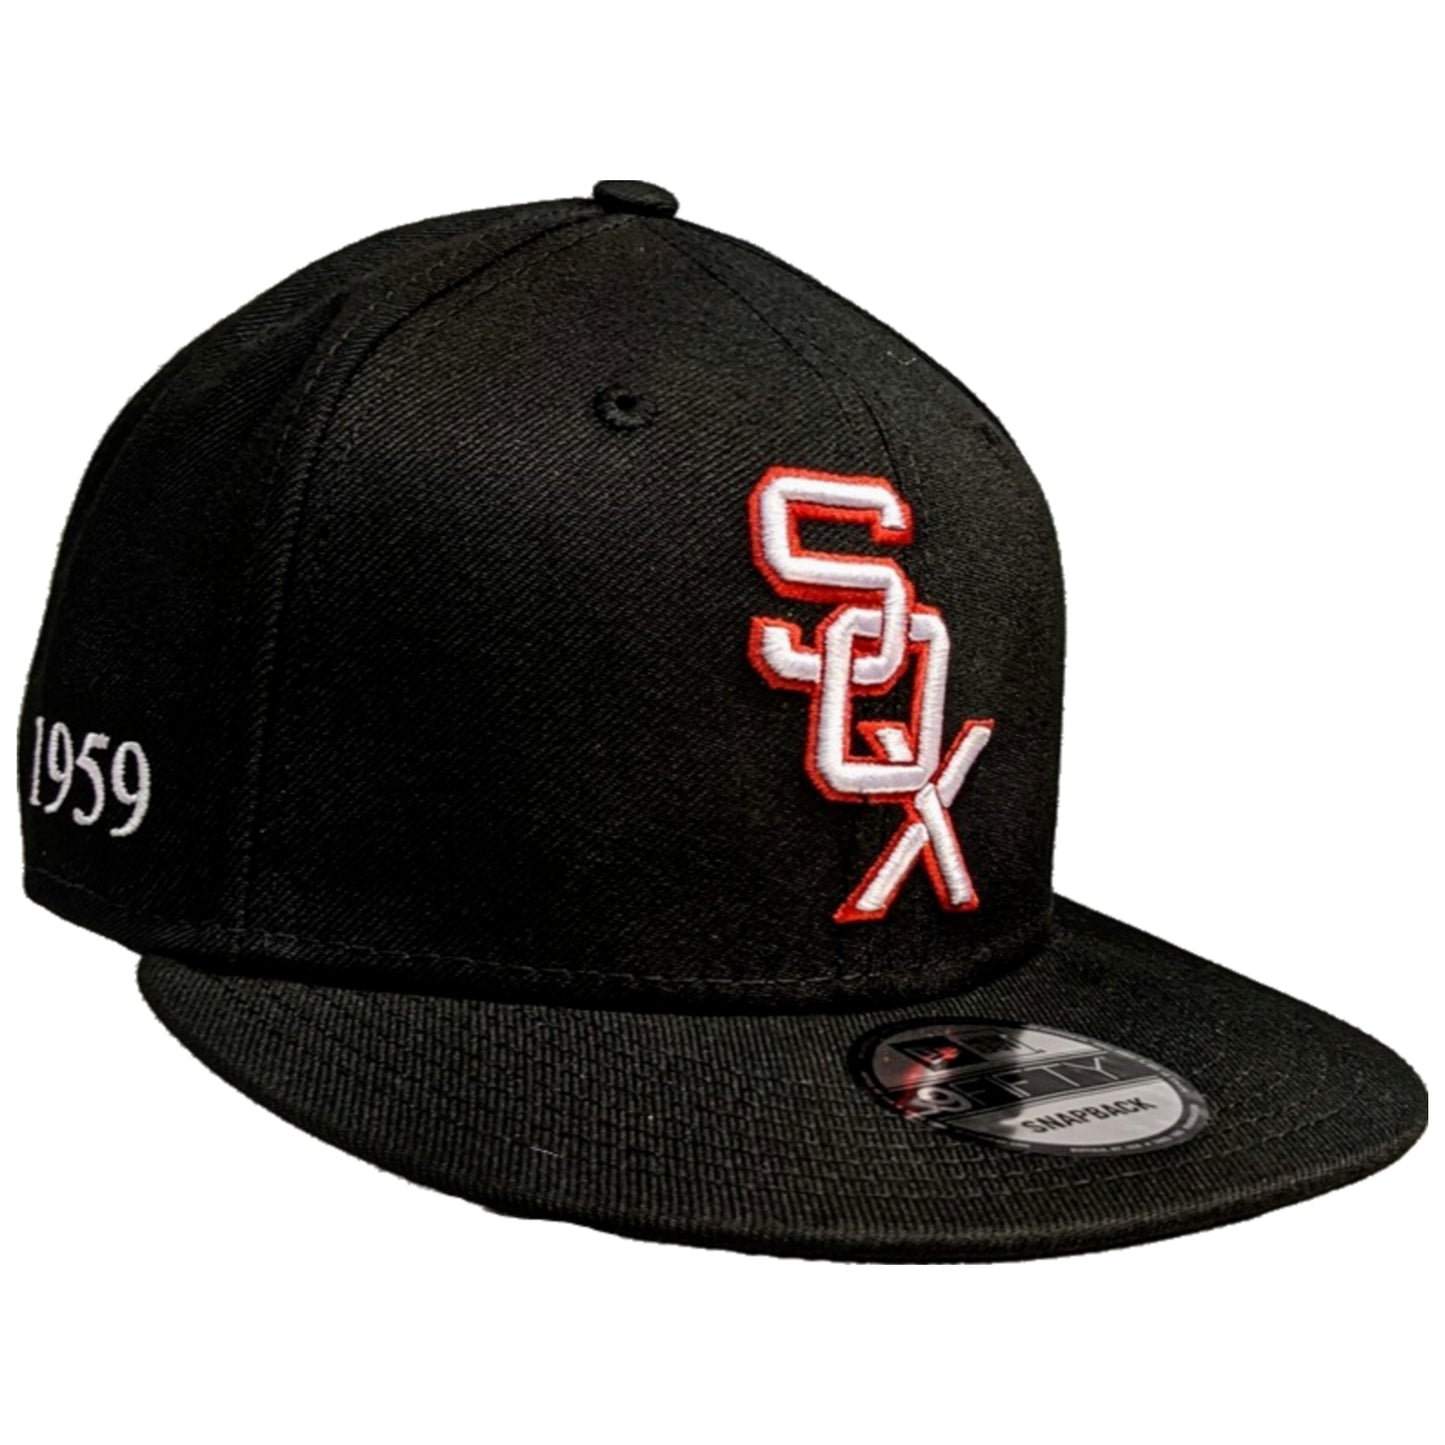 Mens Chicago White Sox New Era Black Cooperstown Collection 1959 9FIFTY Snapback Hat